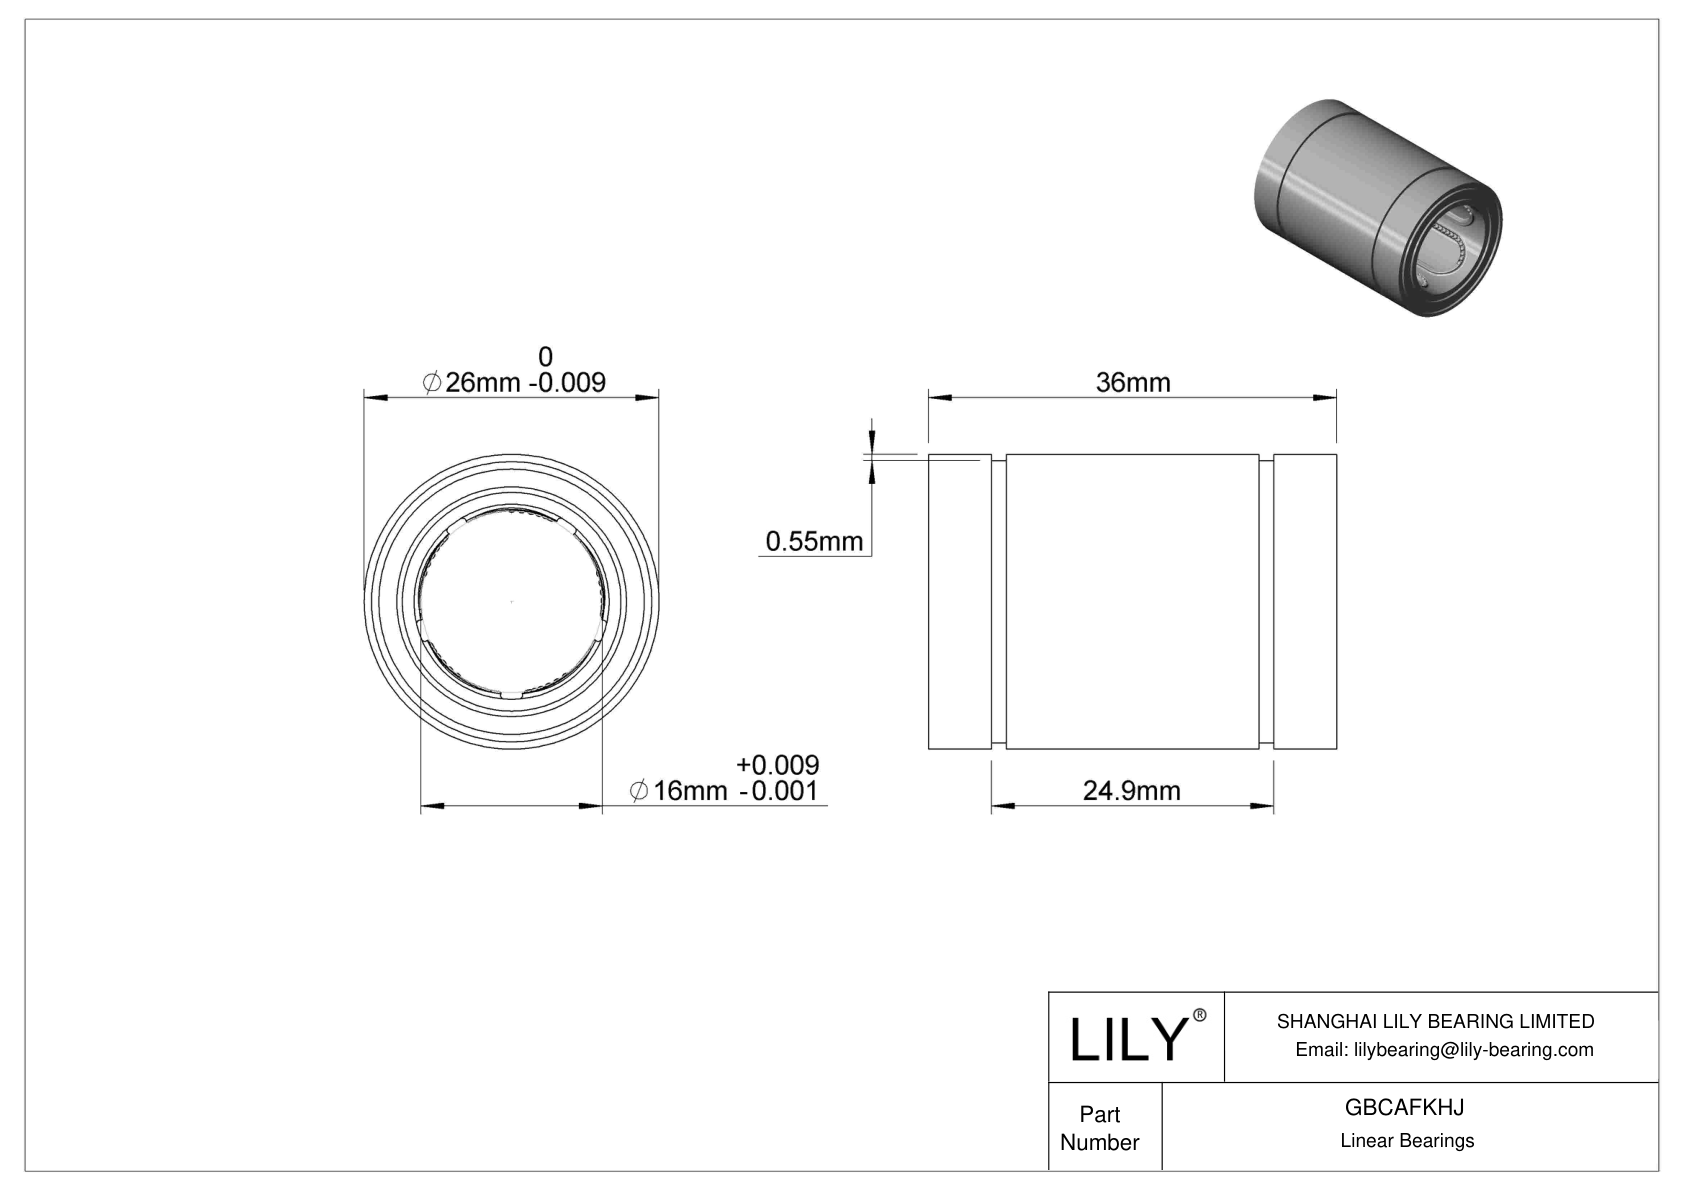 GBCAFKHJ Common Linear Ball Bearings cad drawing